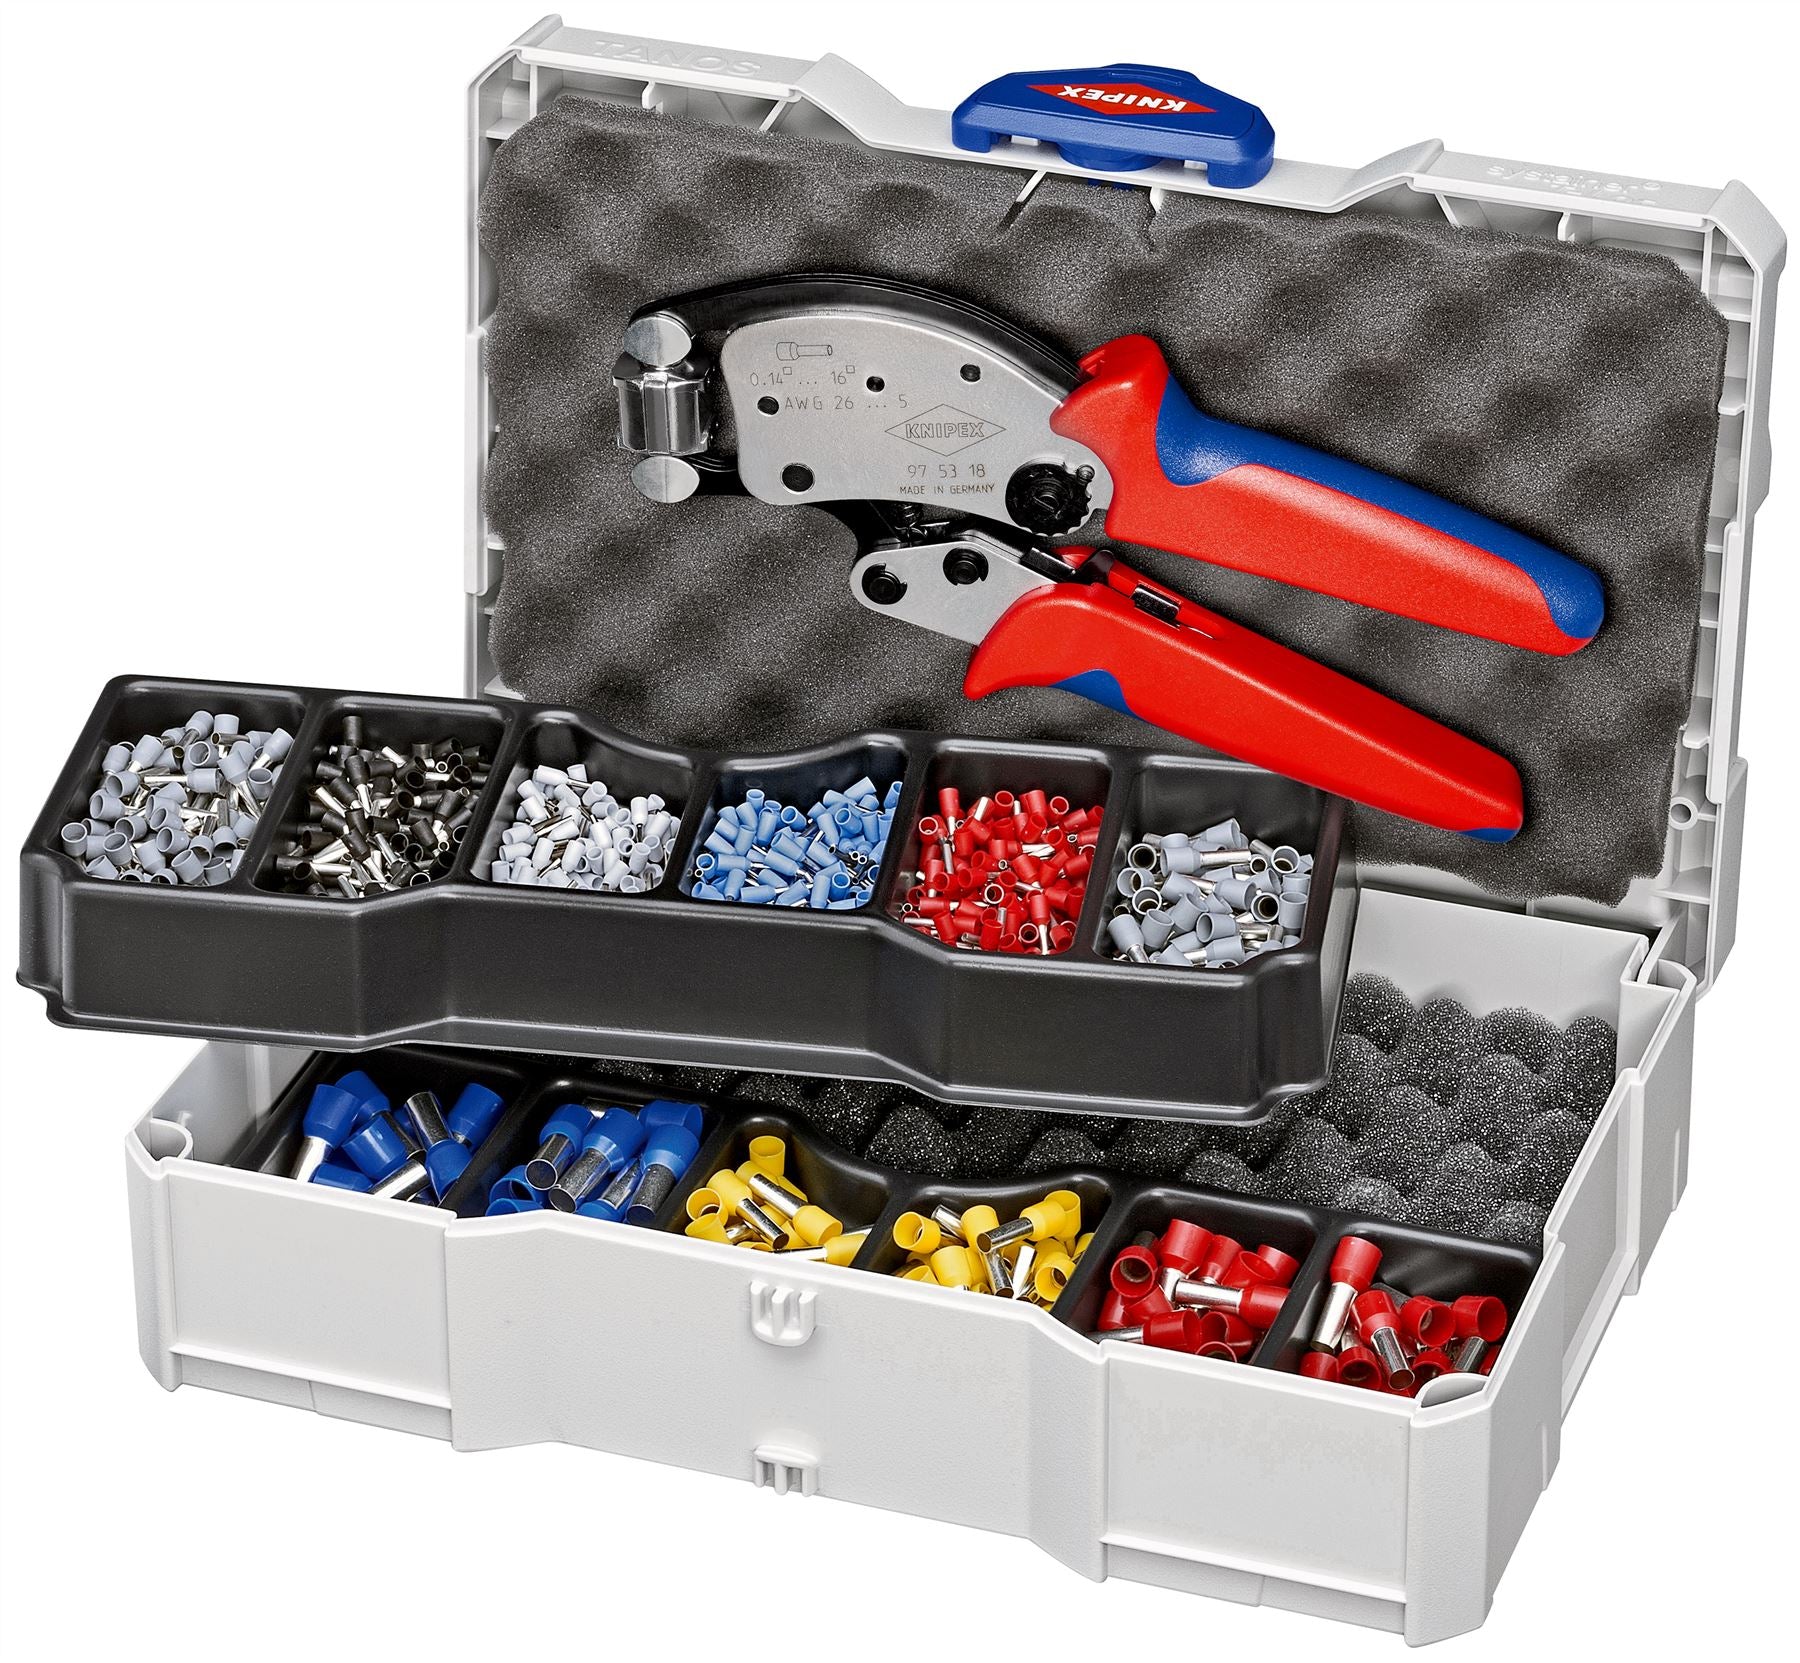 Knipex Crimp Assortment for Wire Ferrules with Plastic Collars in TANOS MINI systainer Box 97 90 13